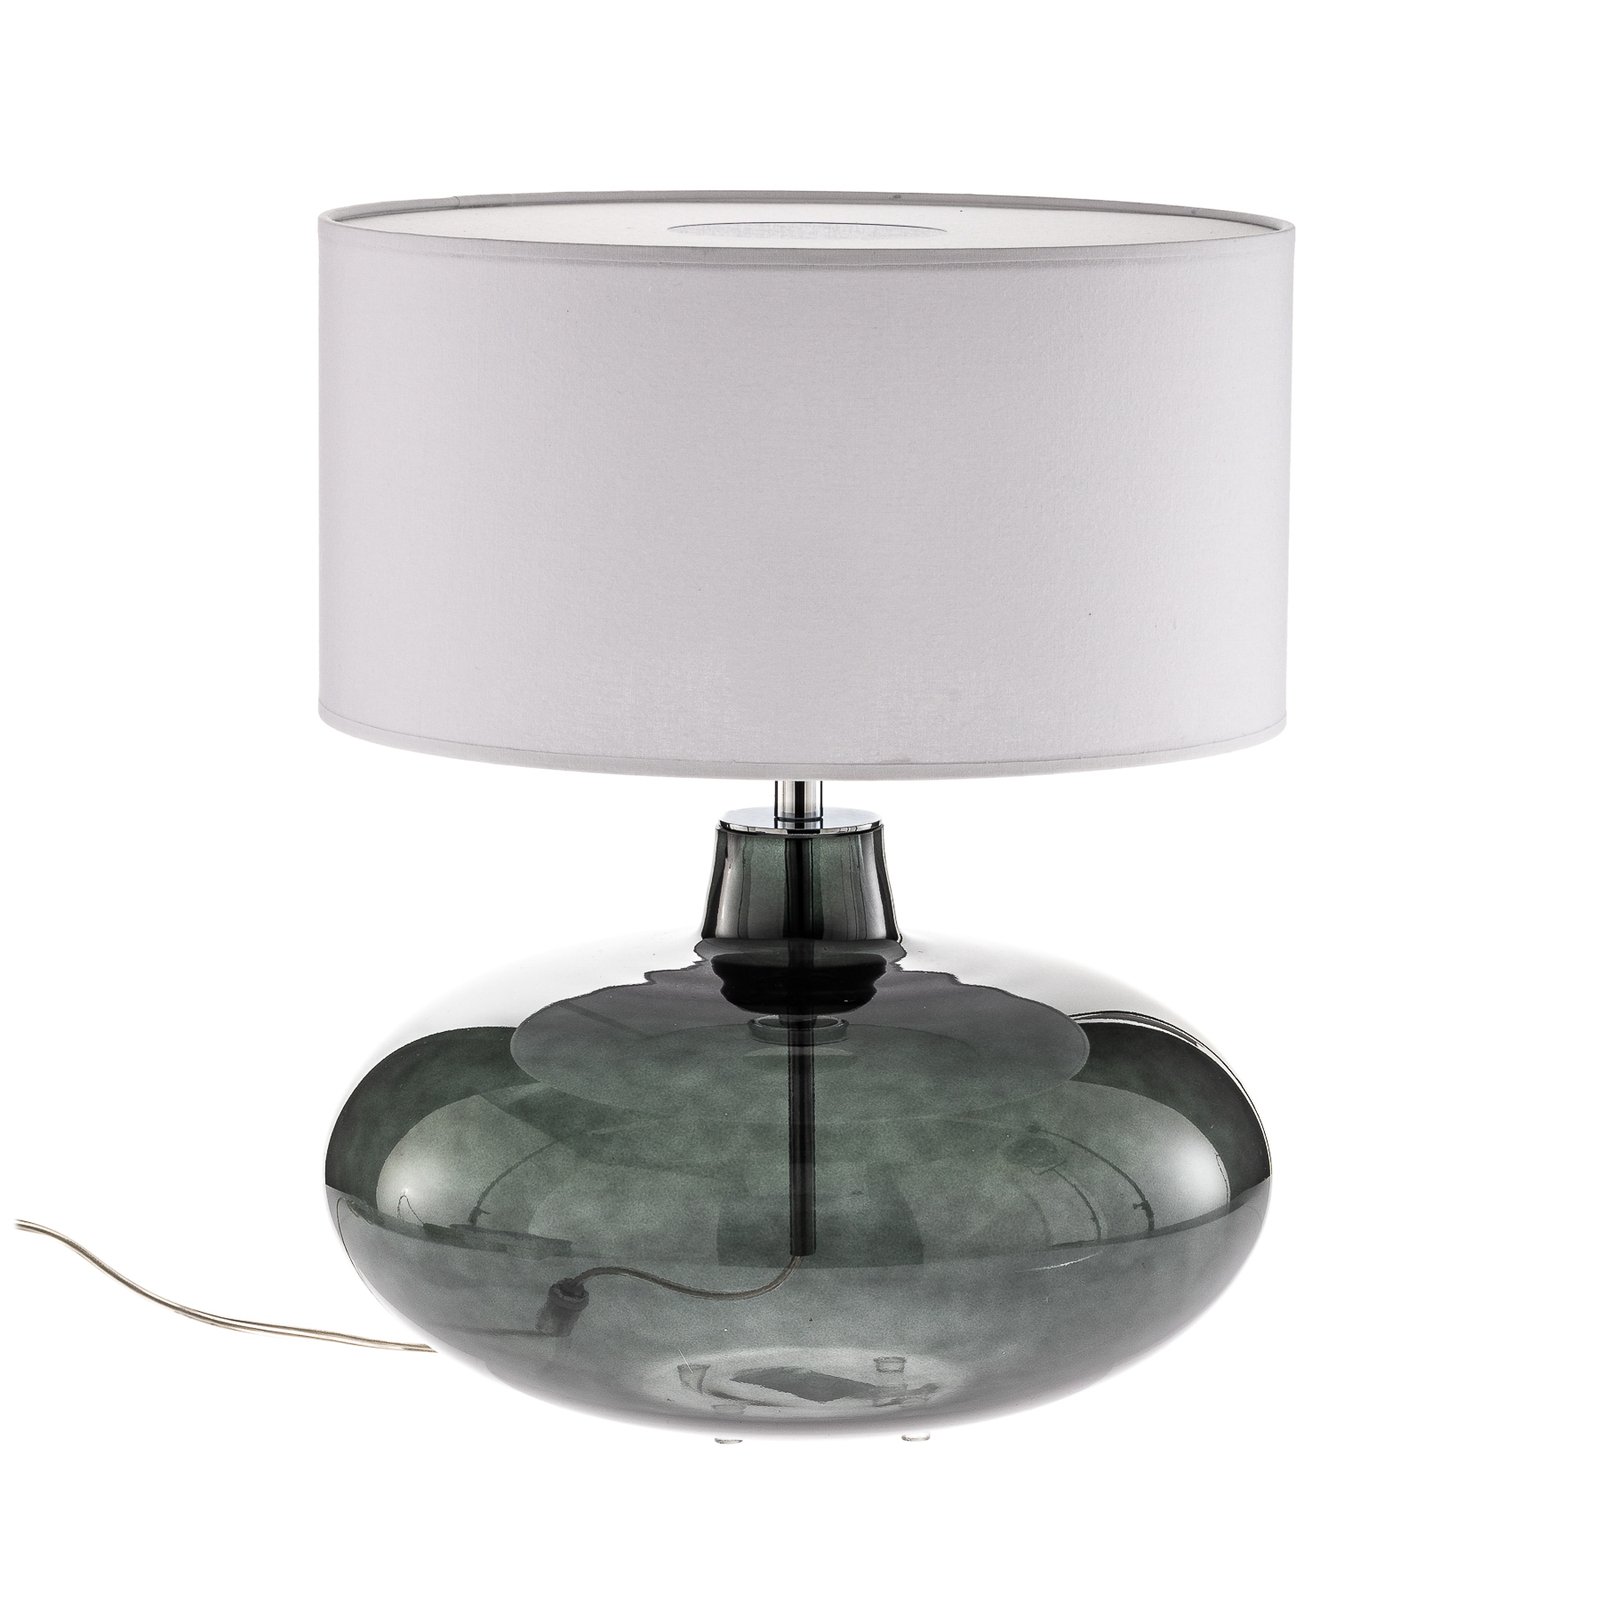 Skien table lamp, white lampshade, grey glass base